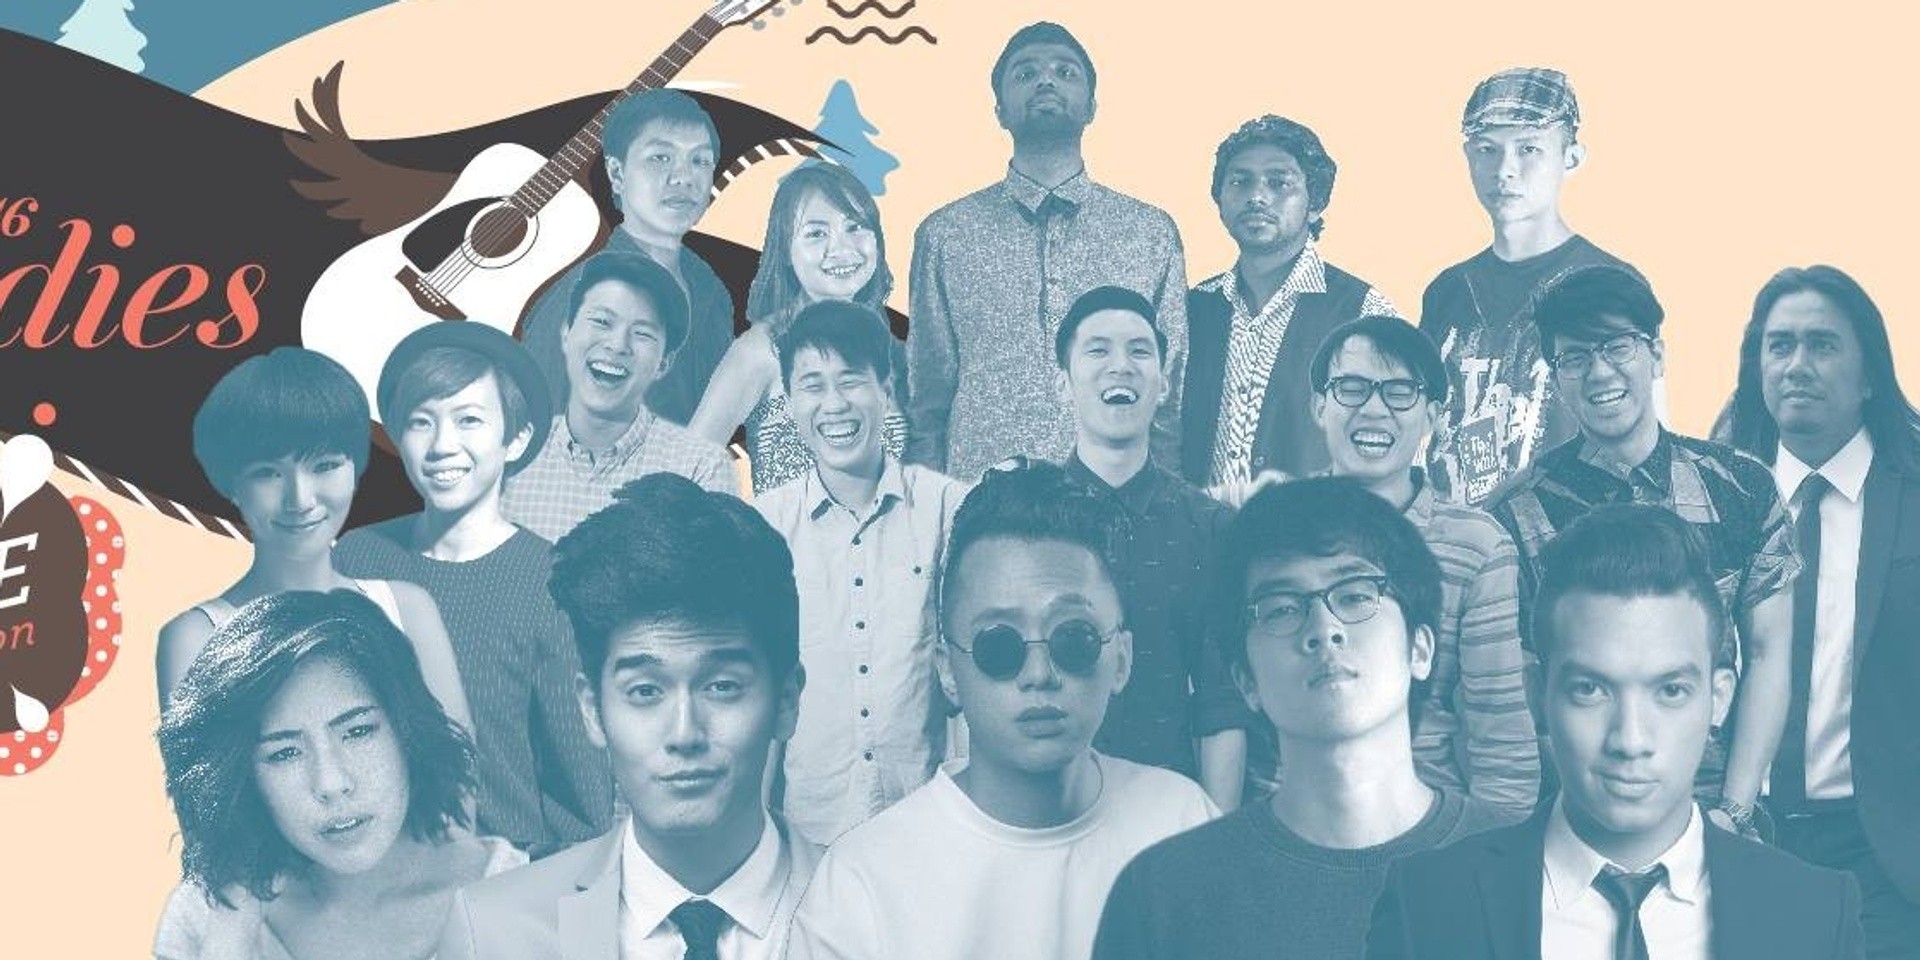 Singapore Rhapsodies pairs up emerging indie musicians with prominent pop stars